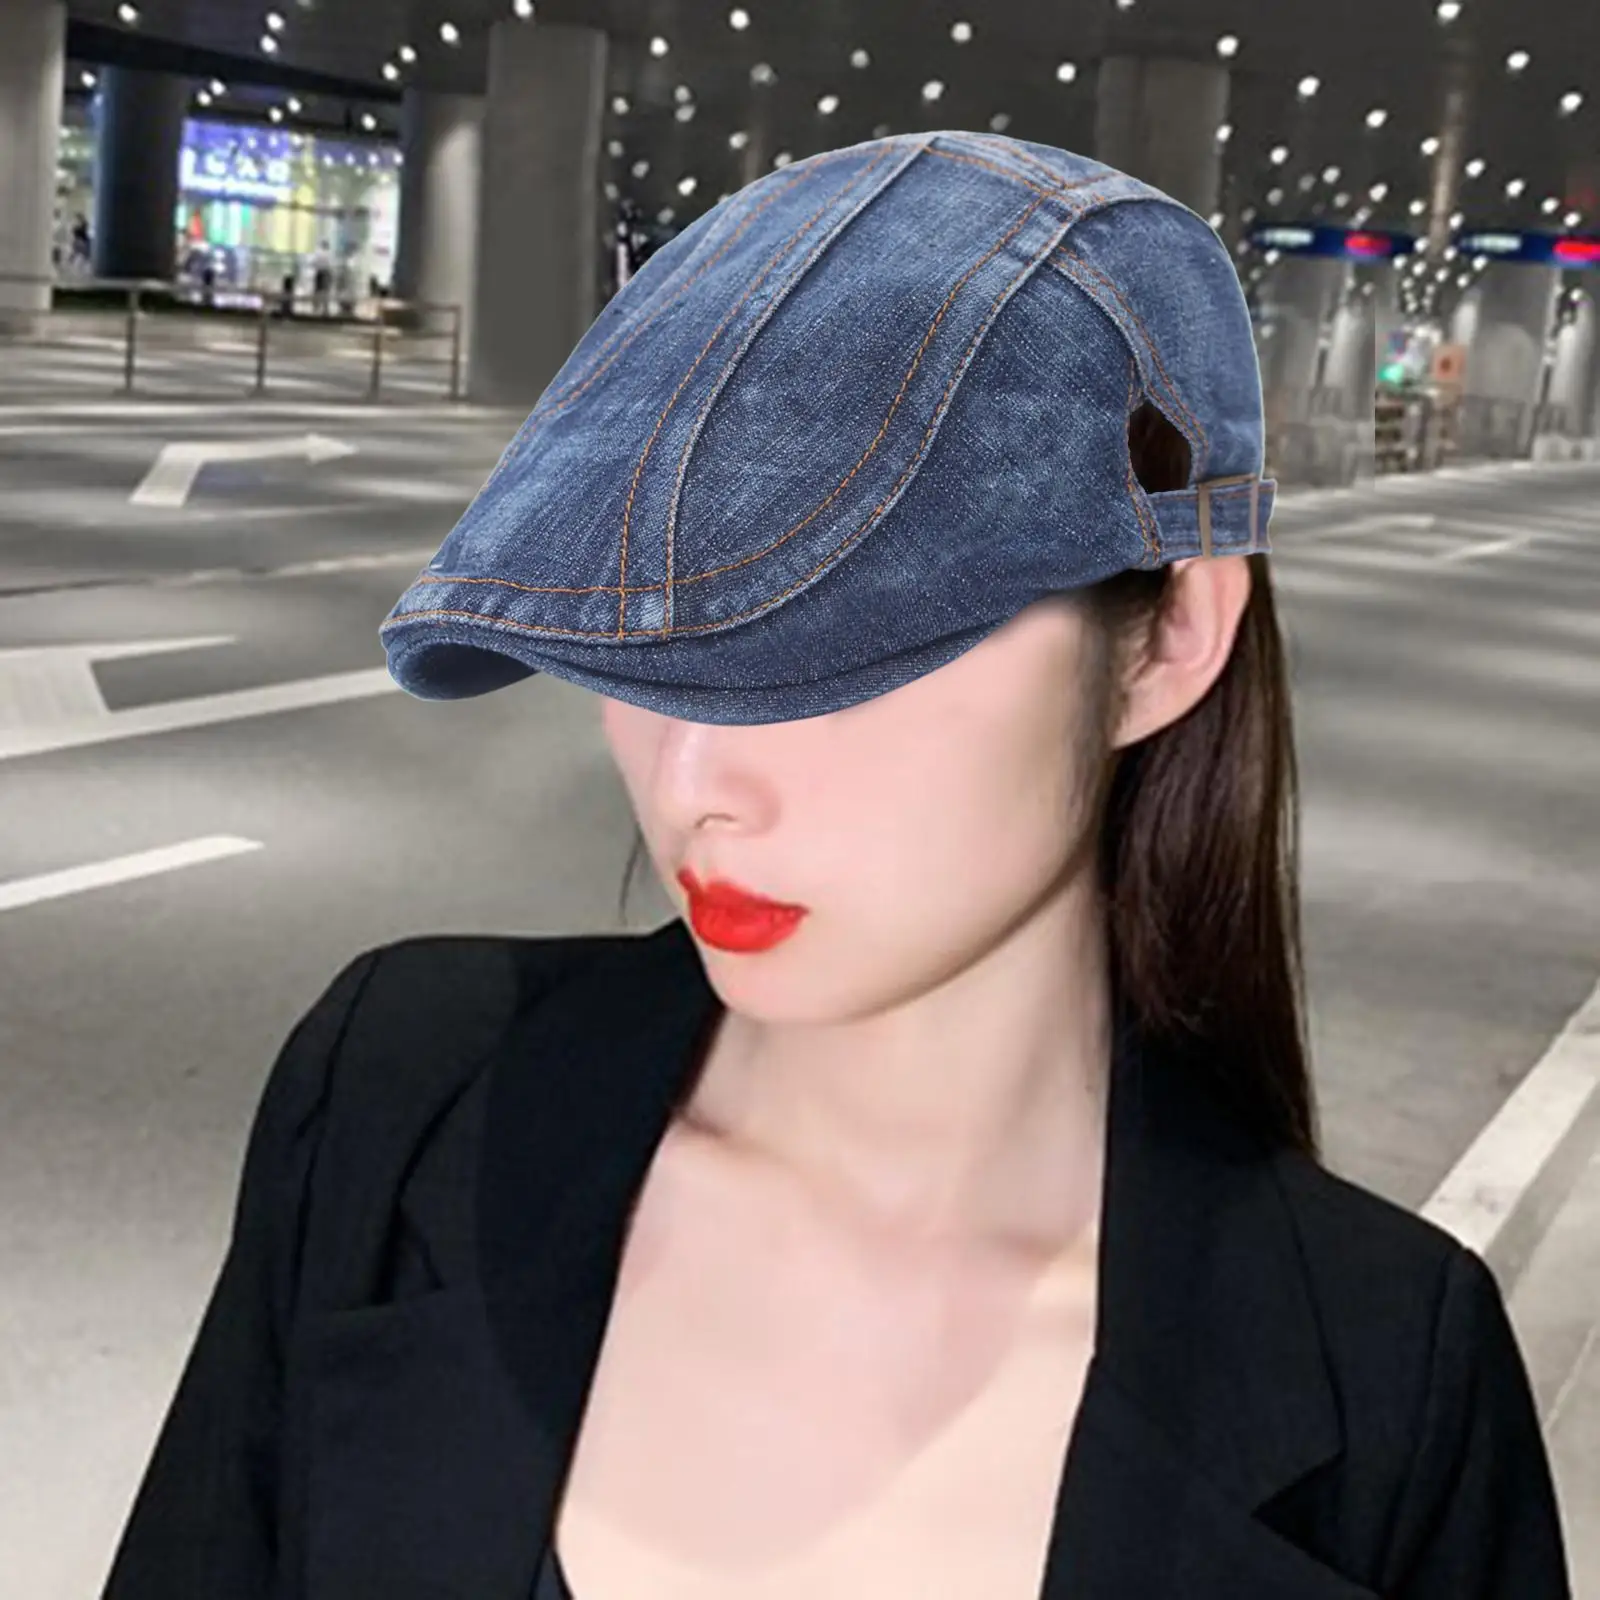 Unisex Newsboy Hat/ Flat Denim Hunting Ivy Snap Driving Cabbie Beret Caps/ for Men Women Washable Washed Jean/